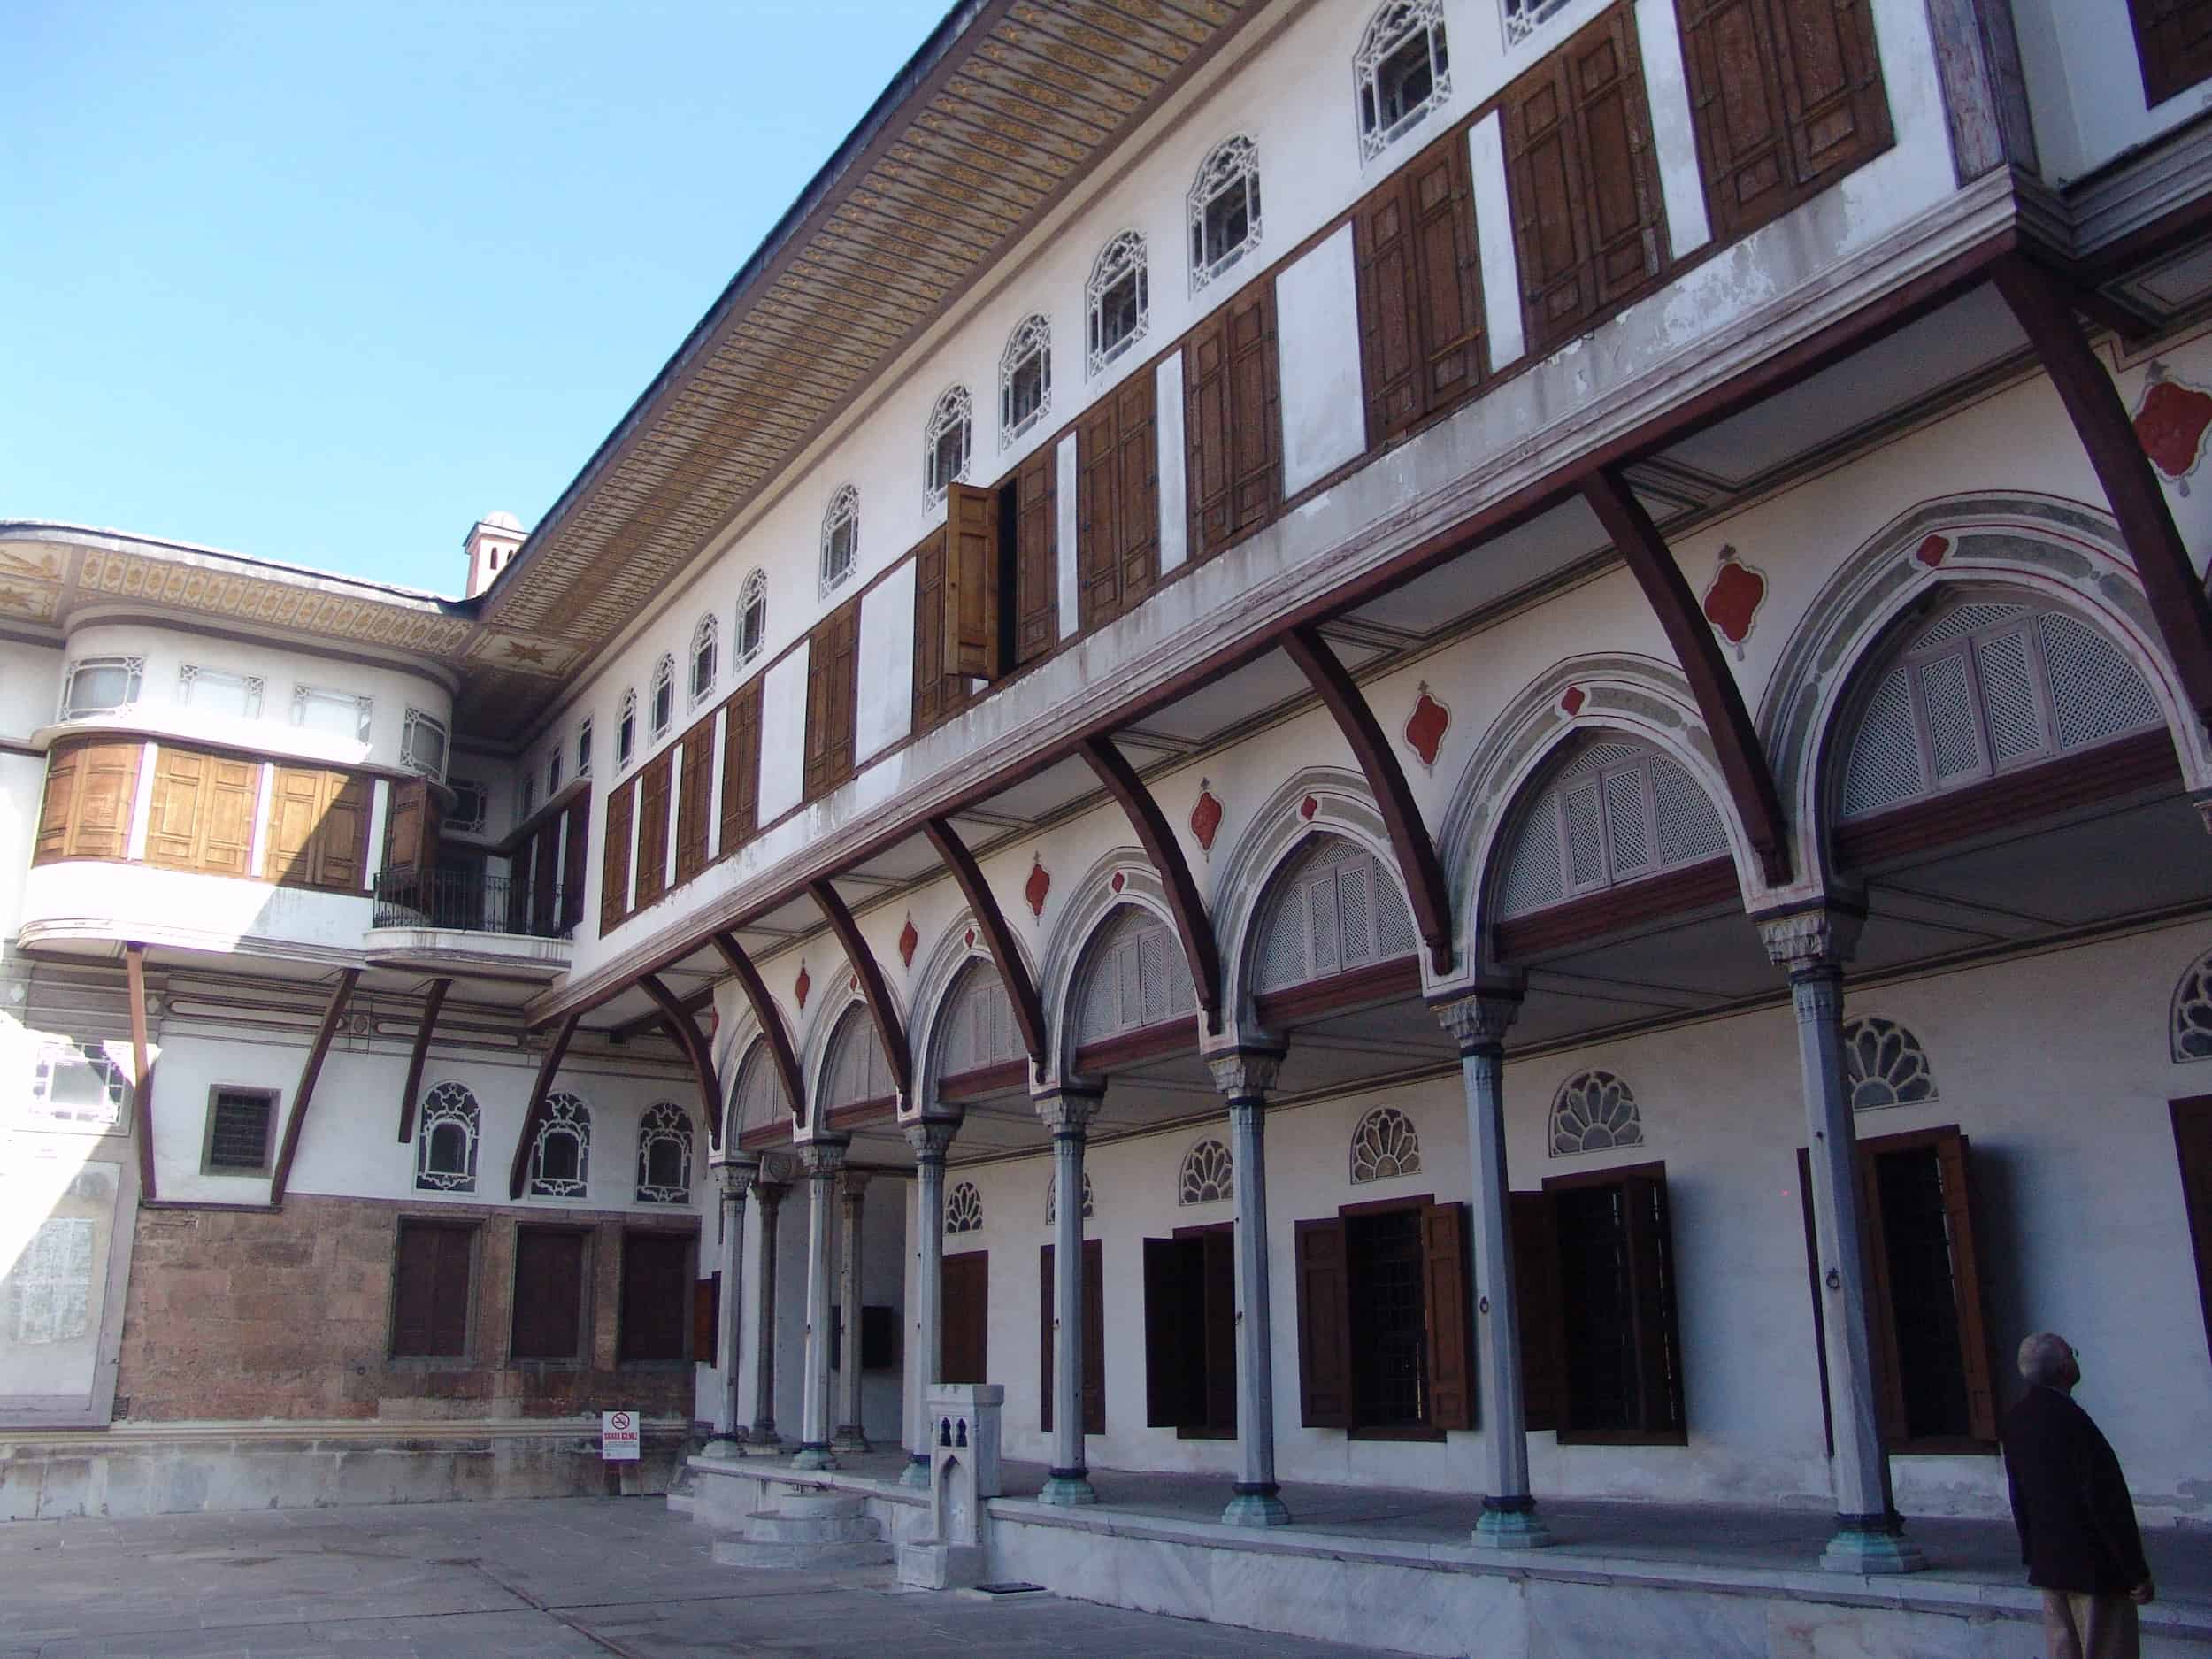 Apartments of the Favorites in the Imperial Harem at Topkapi Palace in Istanbul, Turkey